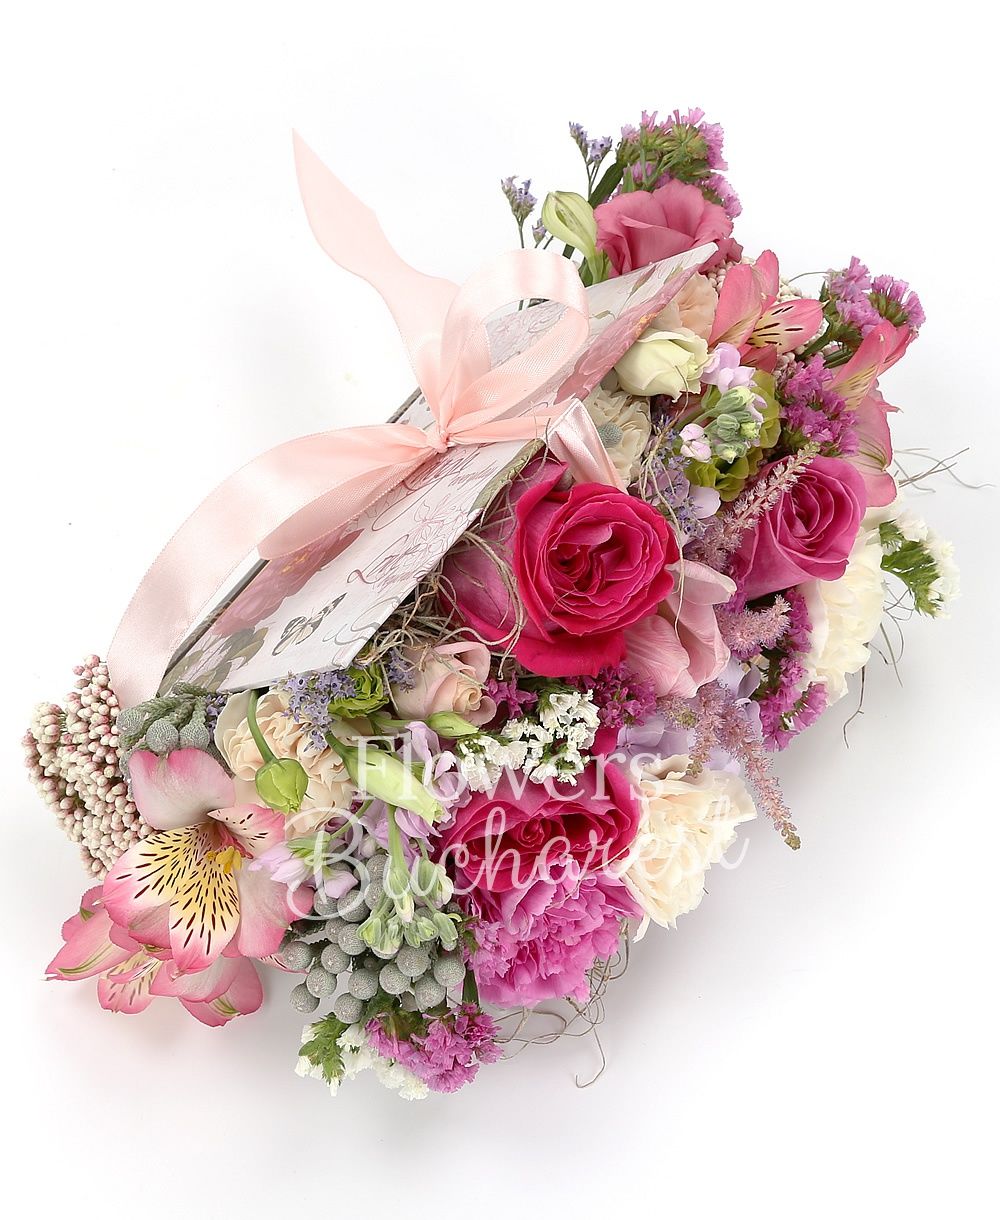 3 cyclam roses, 5 carnations, 3 cyclam carnations, 2 pink alstroemeria, 3 pink lisianthus, 3 brunia, 2 pink mathiolla, pink astilbe, rice flower, pink limonium